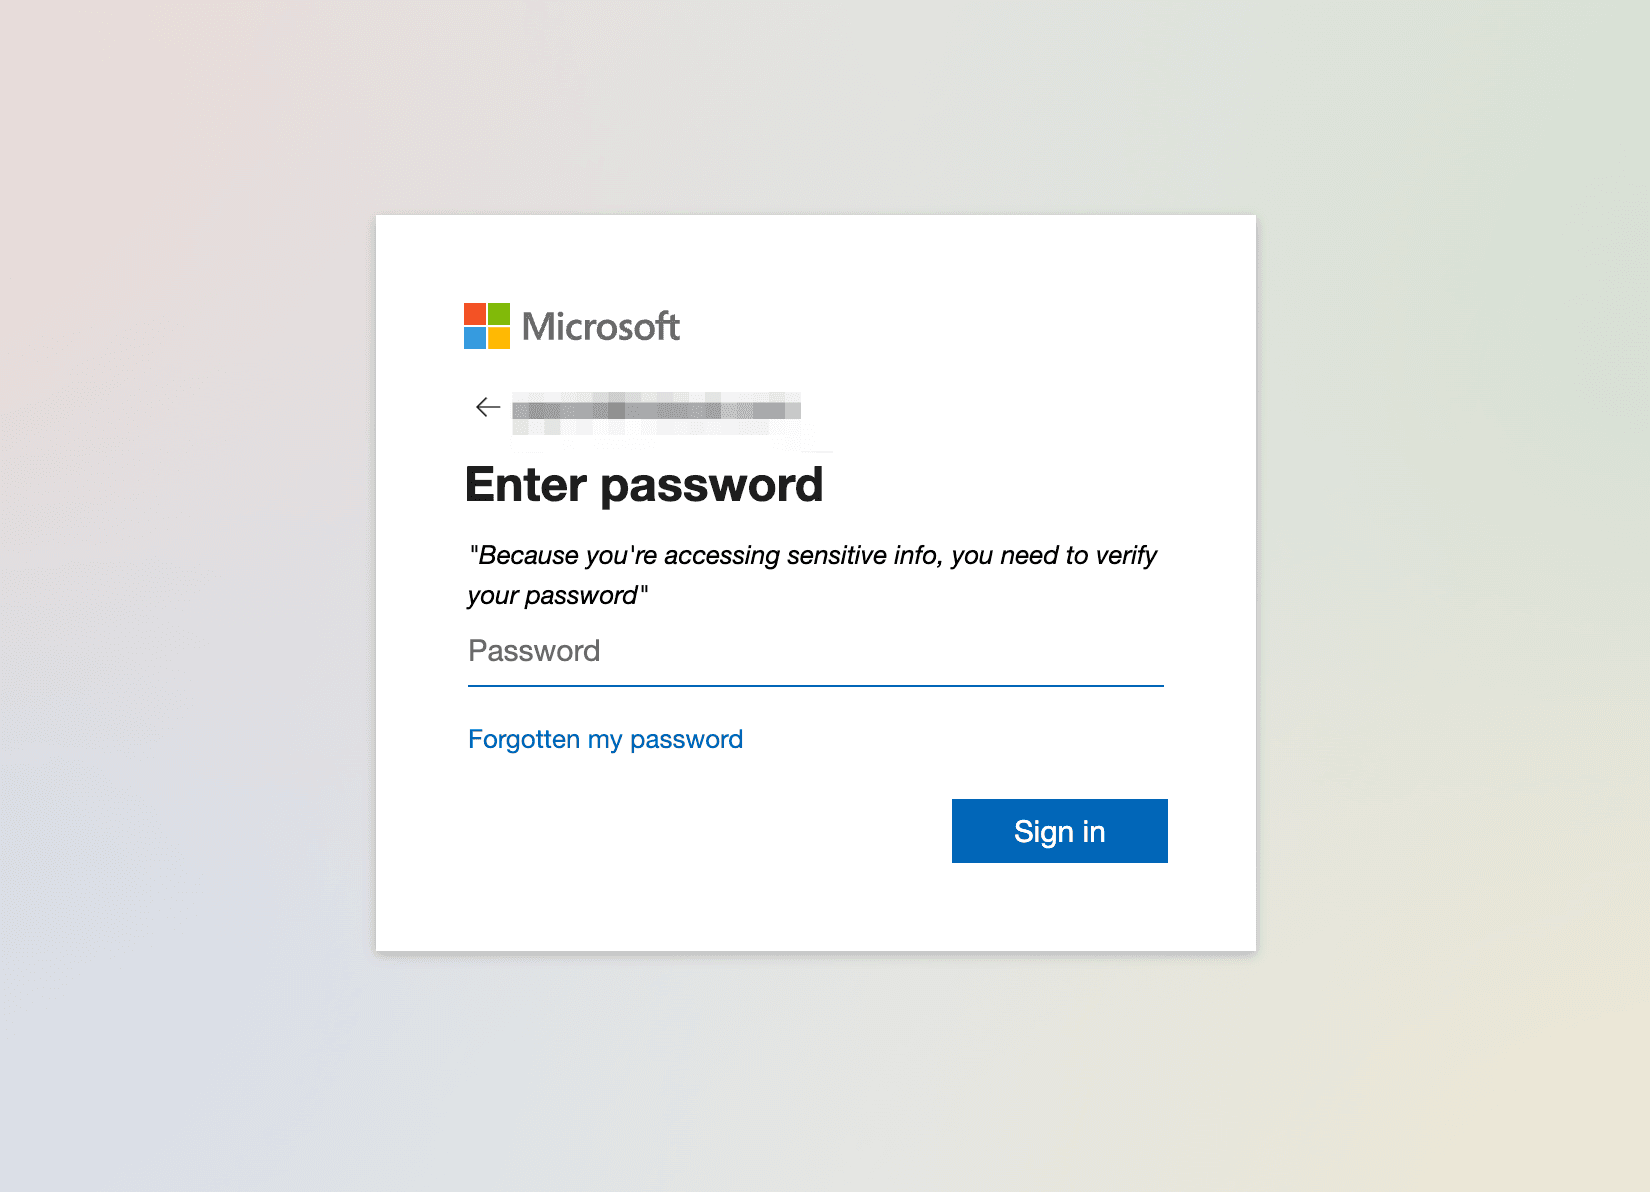 HTML attachment phishing page